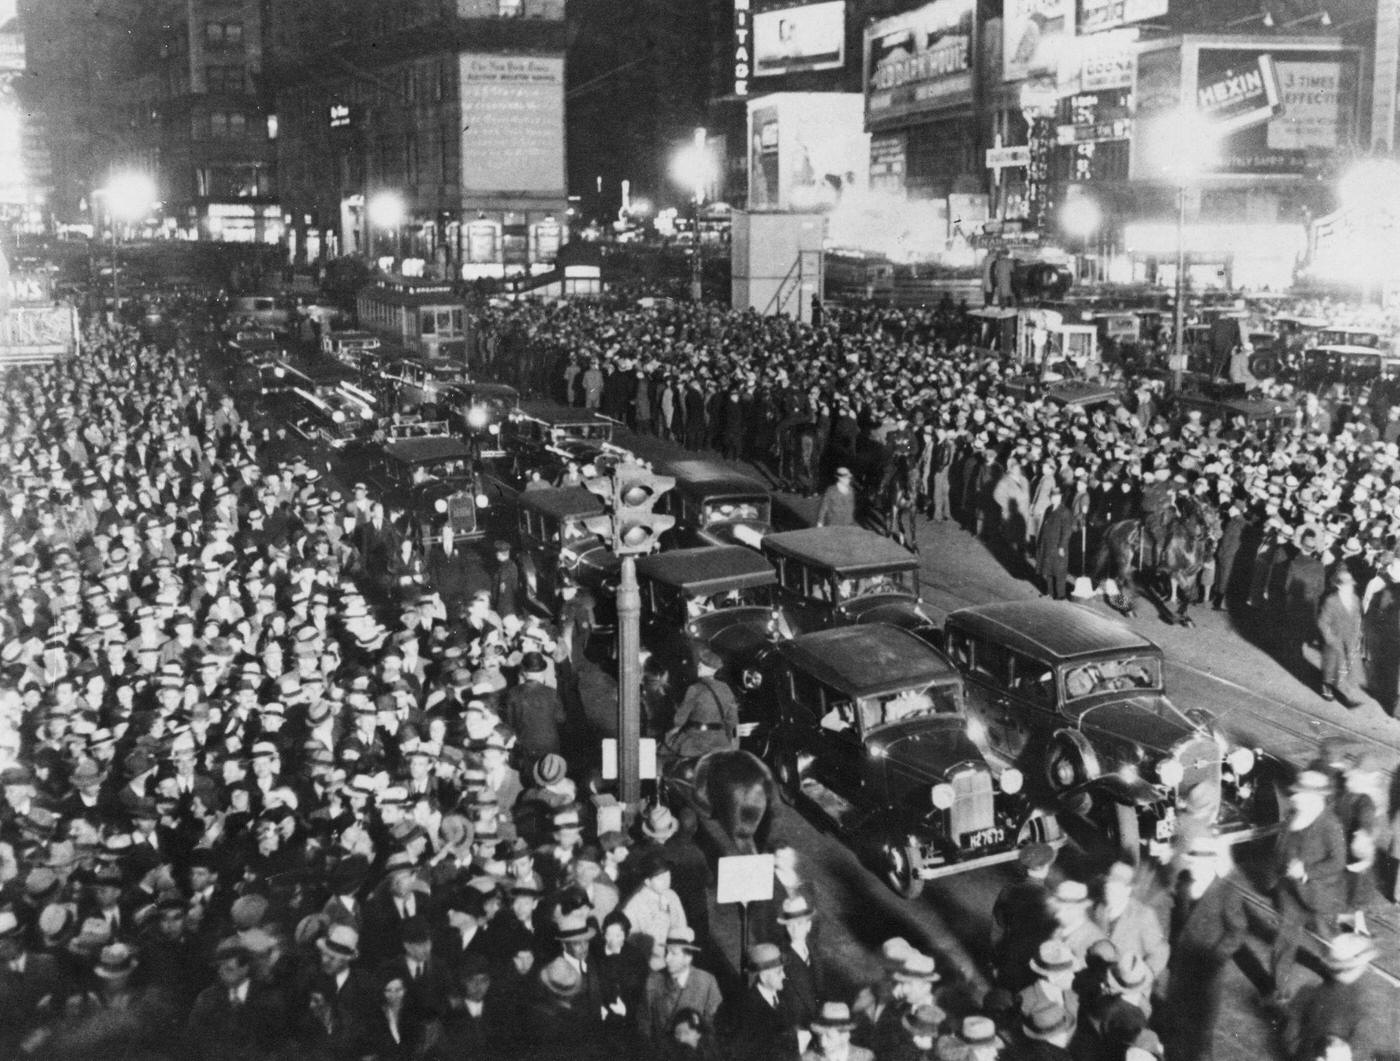 1944 United States Presidential Election In Times Square, Manhattan, 1944